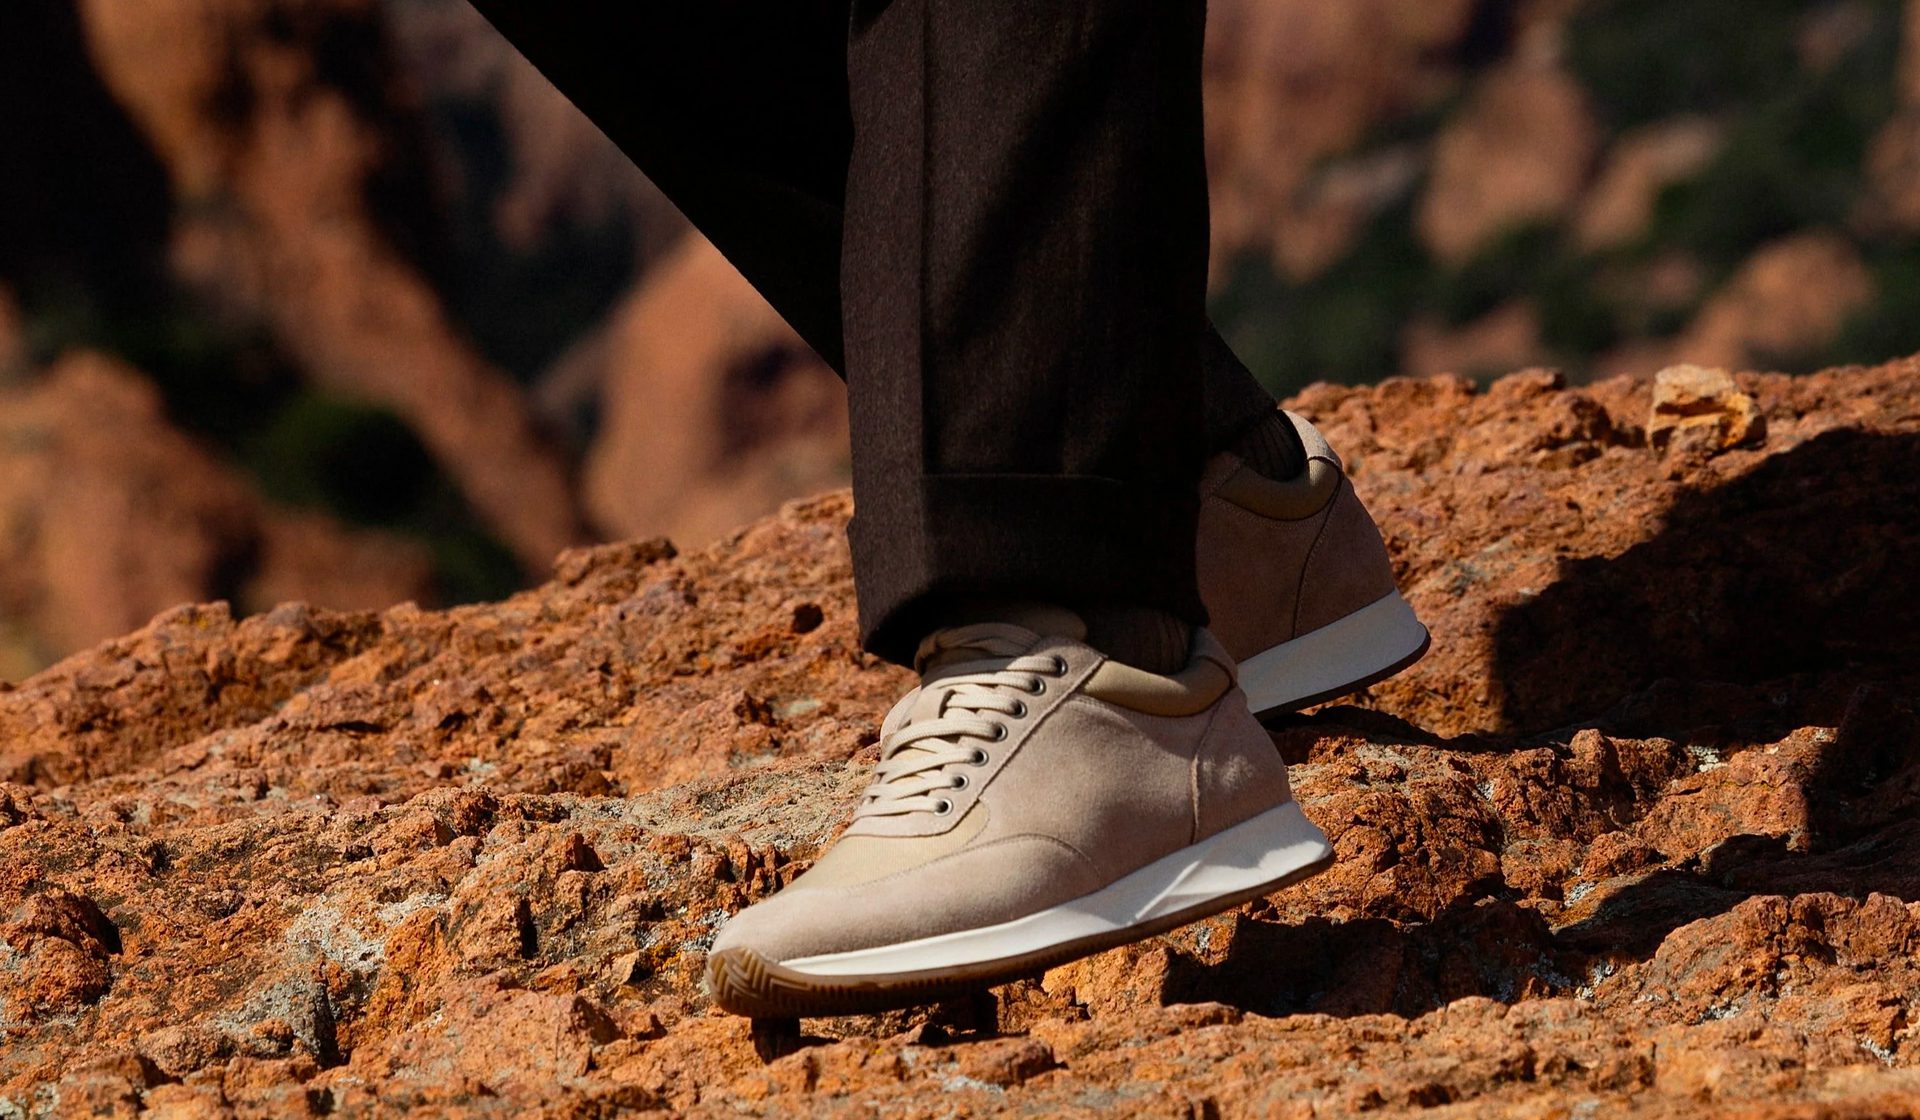 The Coolest 'Dad Shoes' Brands For Men (And The Model To Buy)